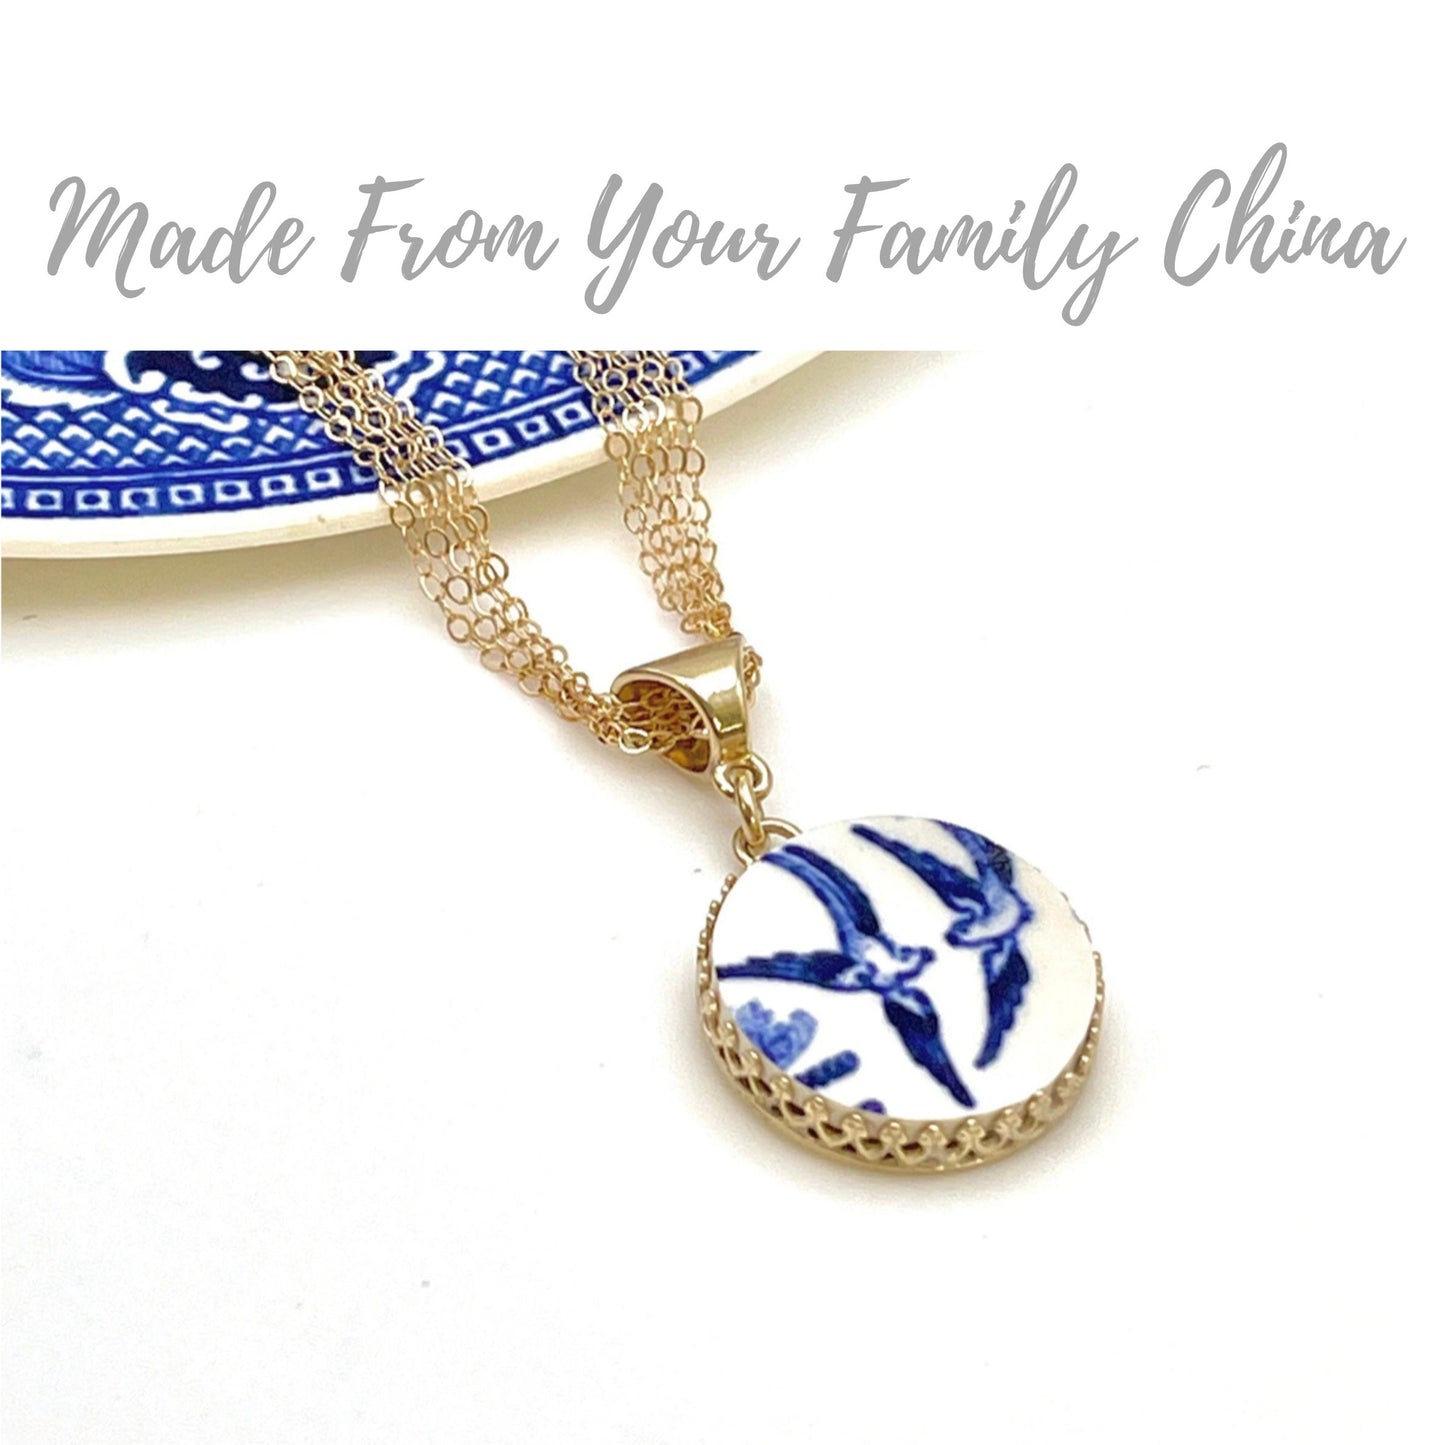 CUSTOM ORDER 14k Double Strand Gold Pendant or Necklace, 20th and 50th Anniversary, Custom Wedding China Broken China Jewelry Gift for Wife